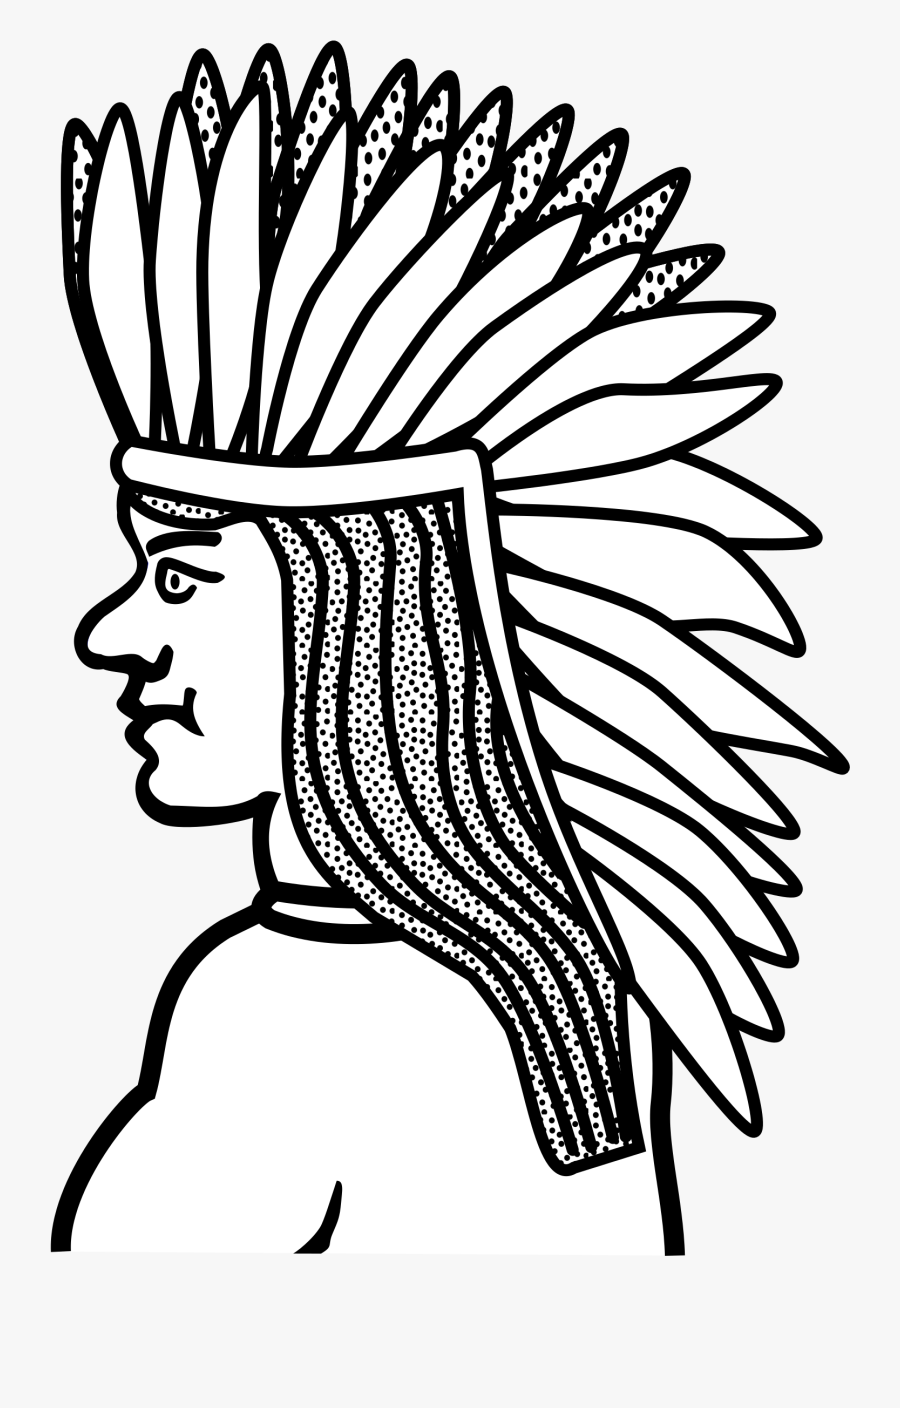 Native Americans In The United States Line Art Drawing - Native American Line Drawings, Transparent Clipart